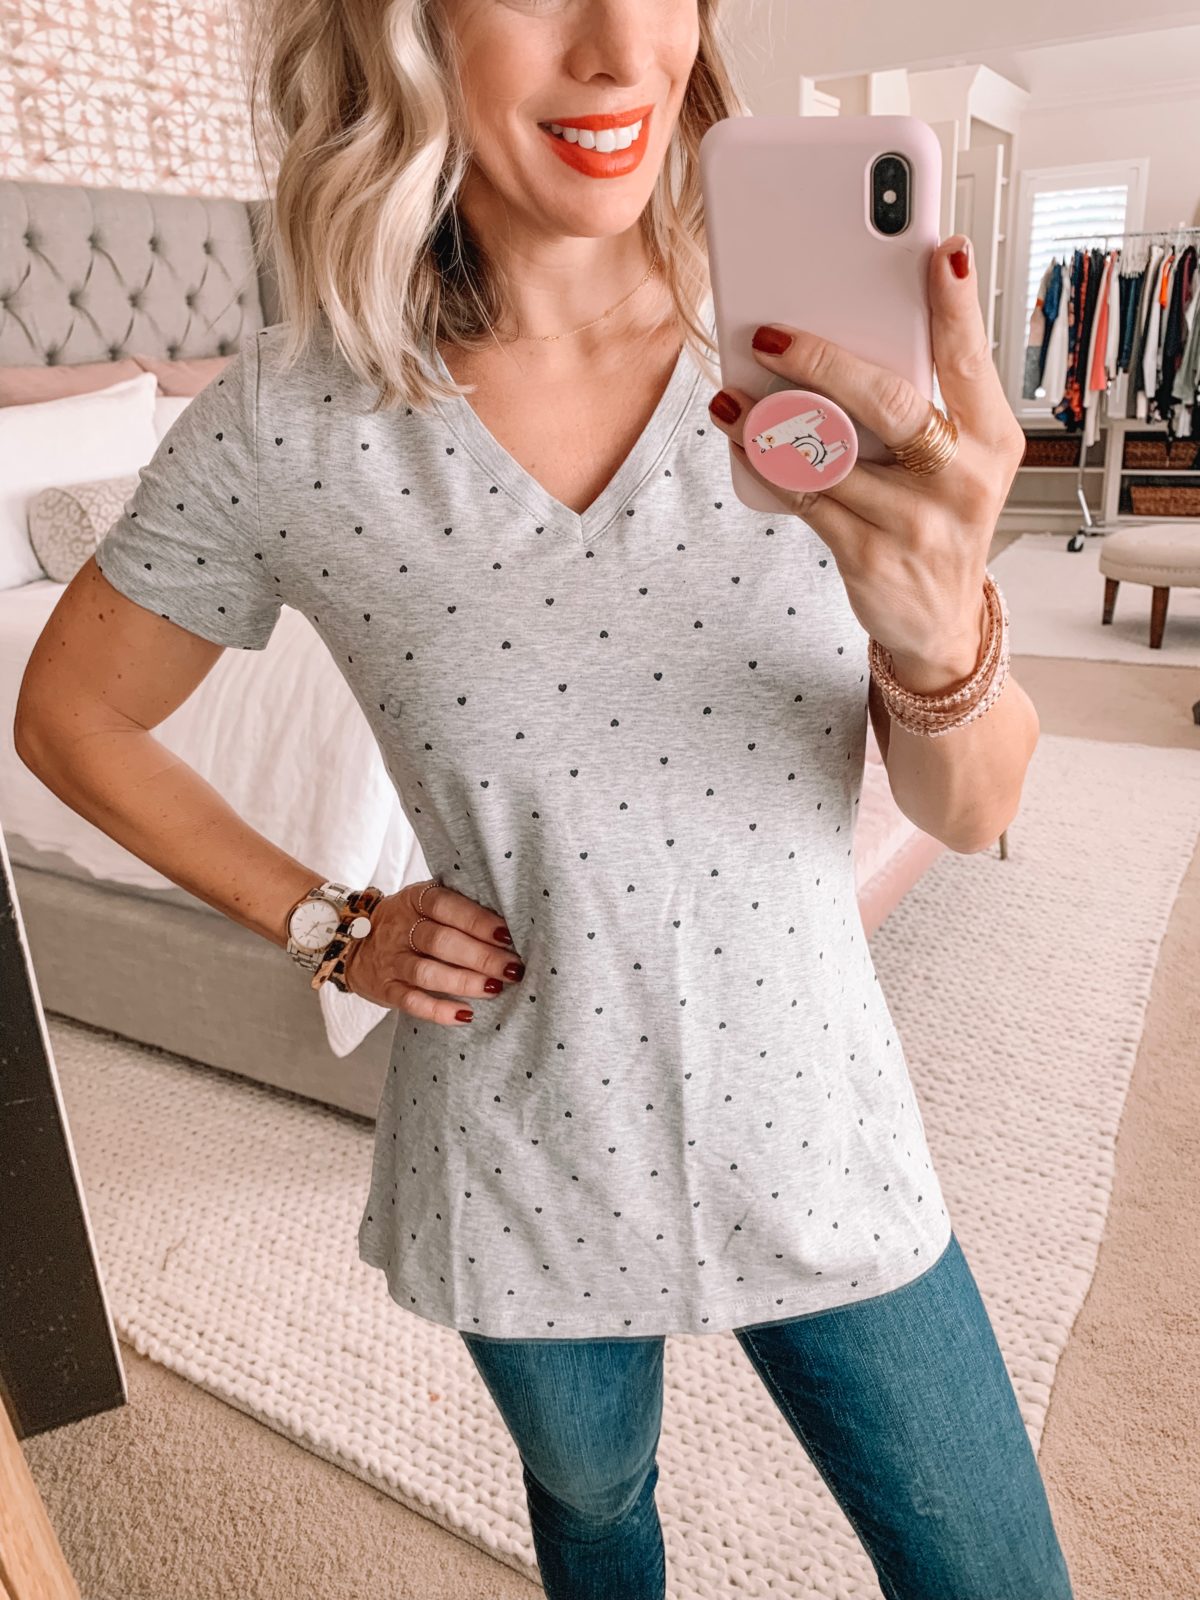 Amazon Prime Fashion- Heart Top and Jeans 